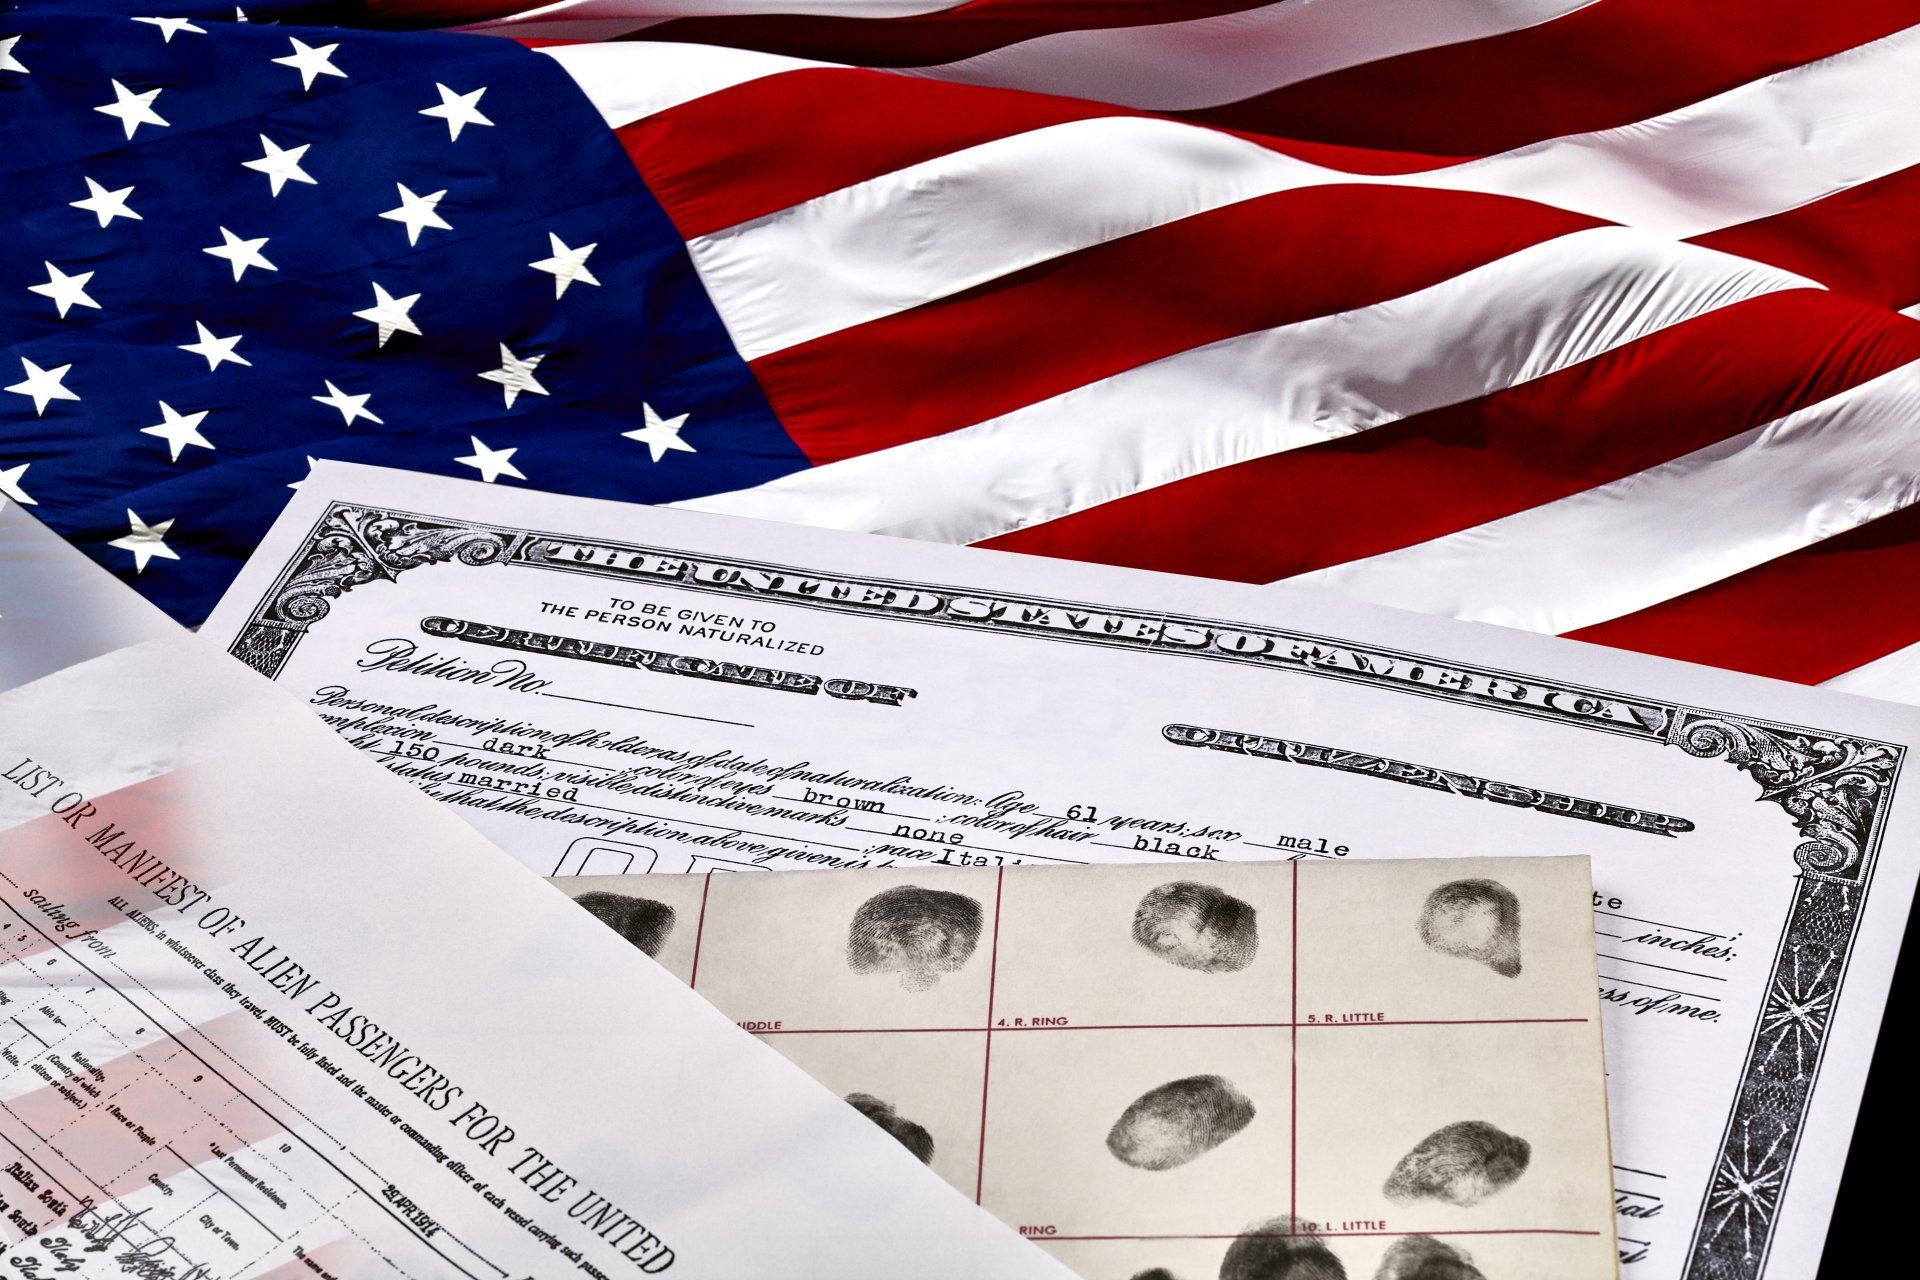 Image of American flag with immigration documentation